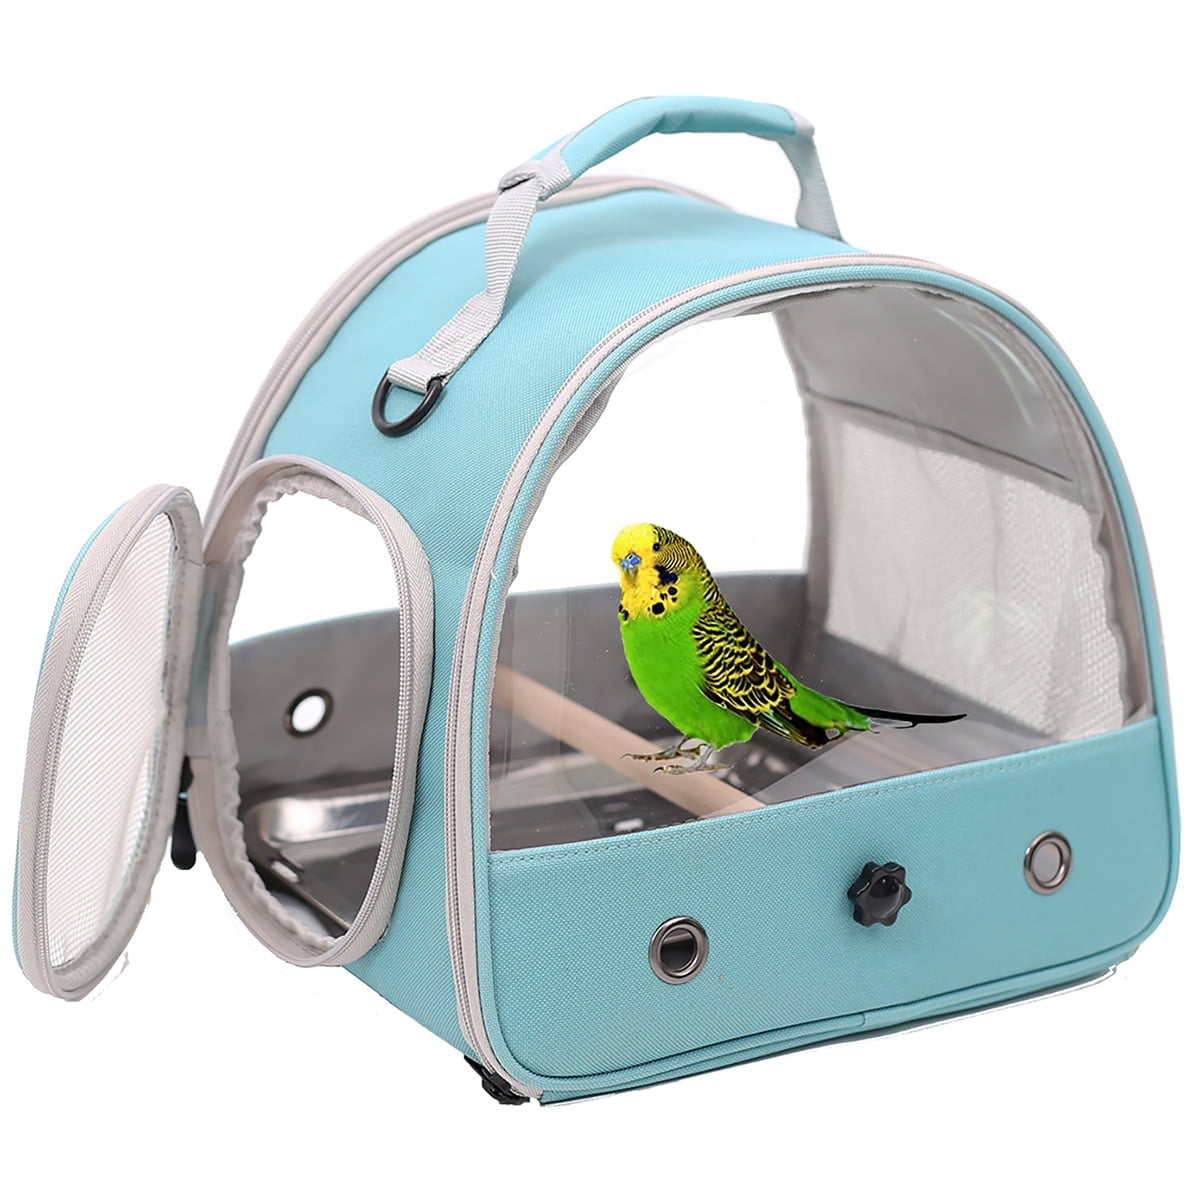  Birds Day Bird Carrier Backpack-Parrot Travel Cage